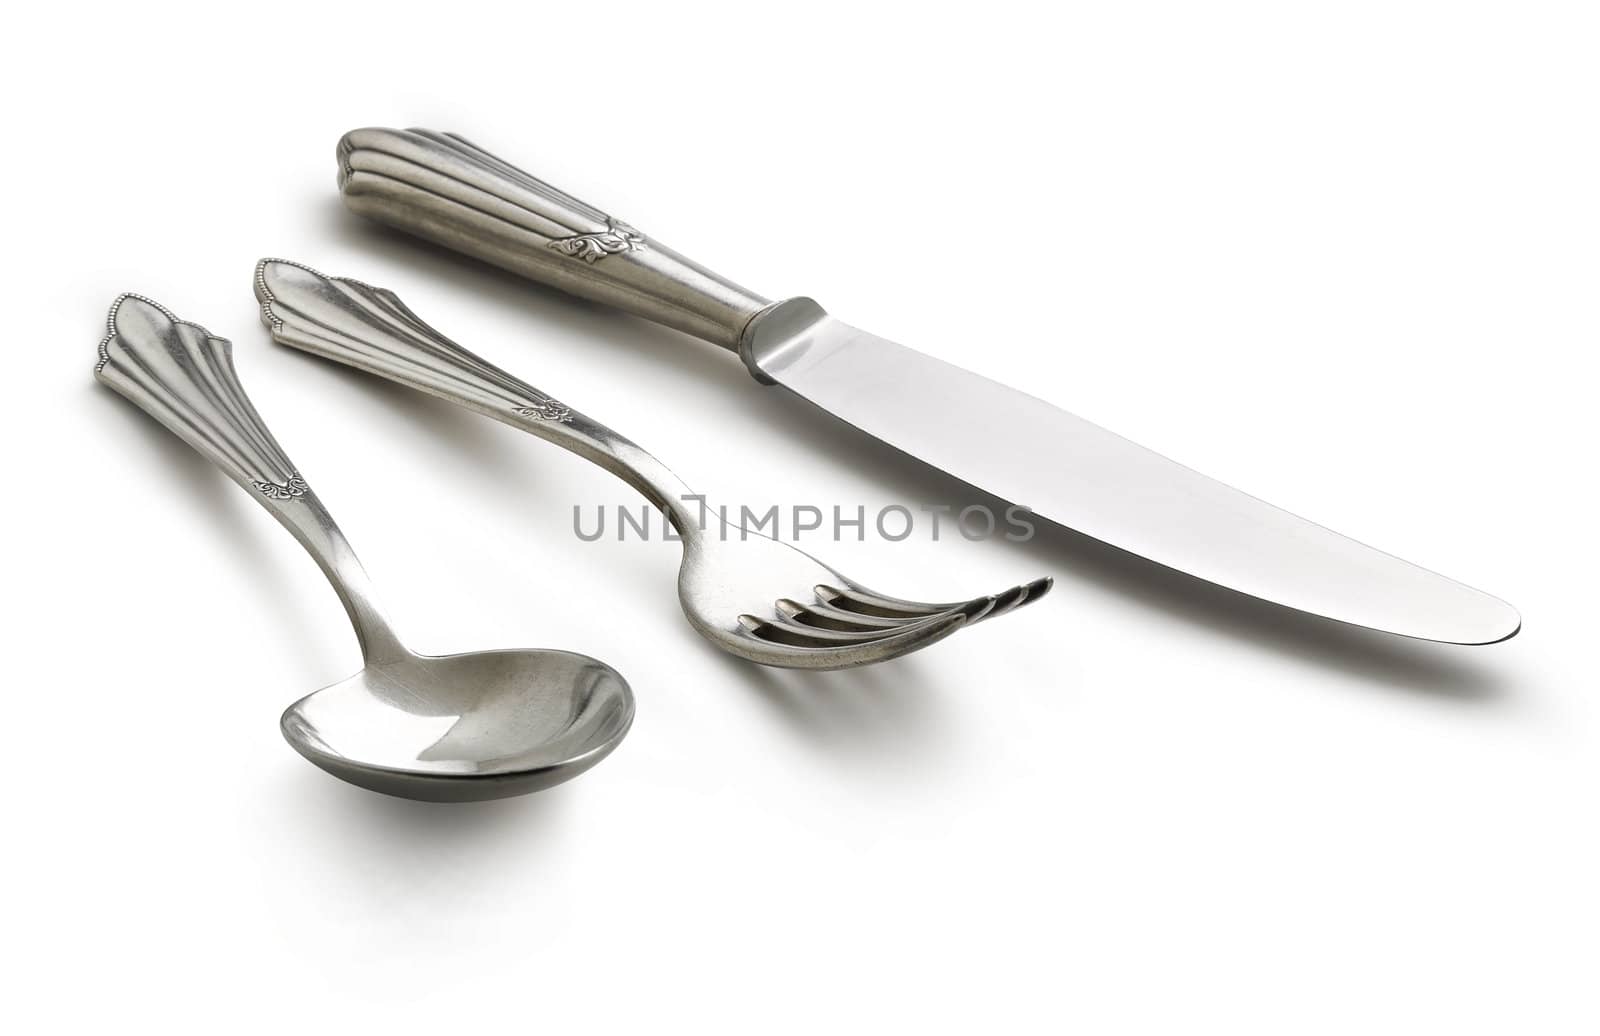 Old Silverware Set (Clipping Path) by pbombaert